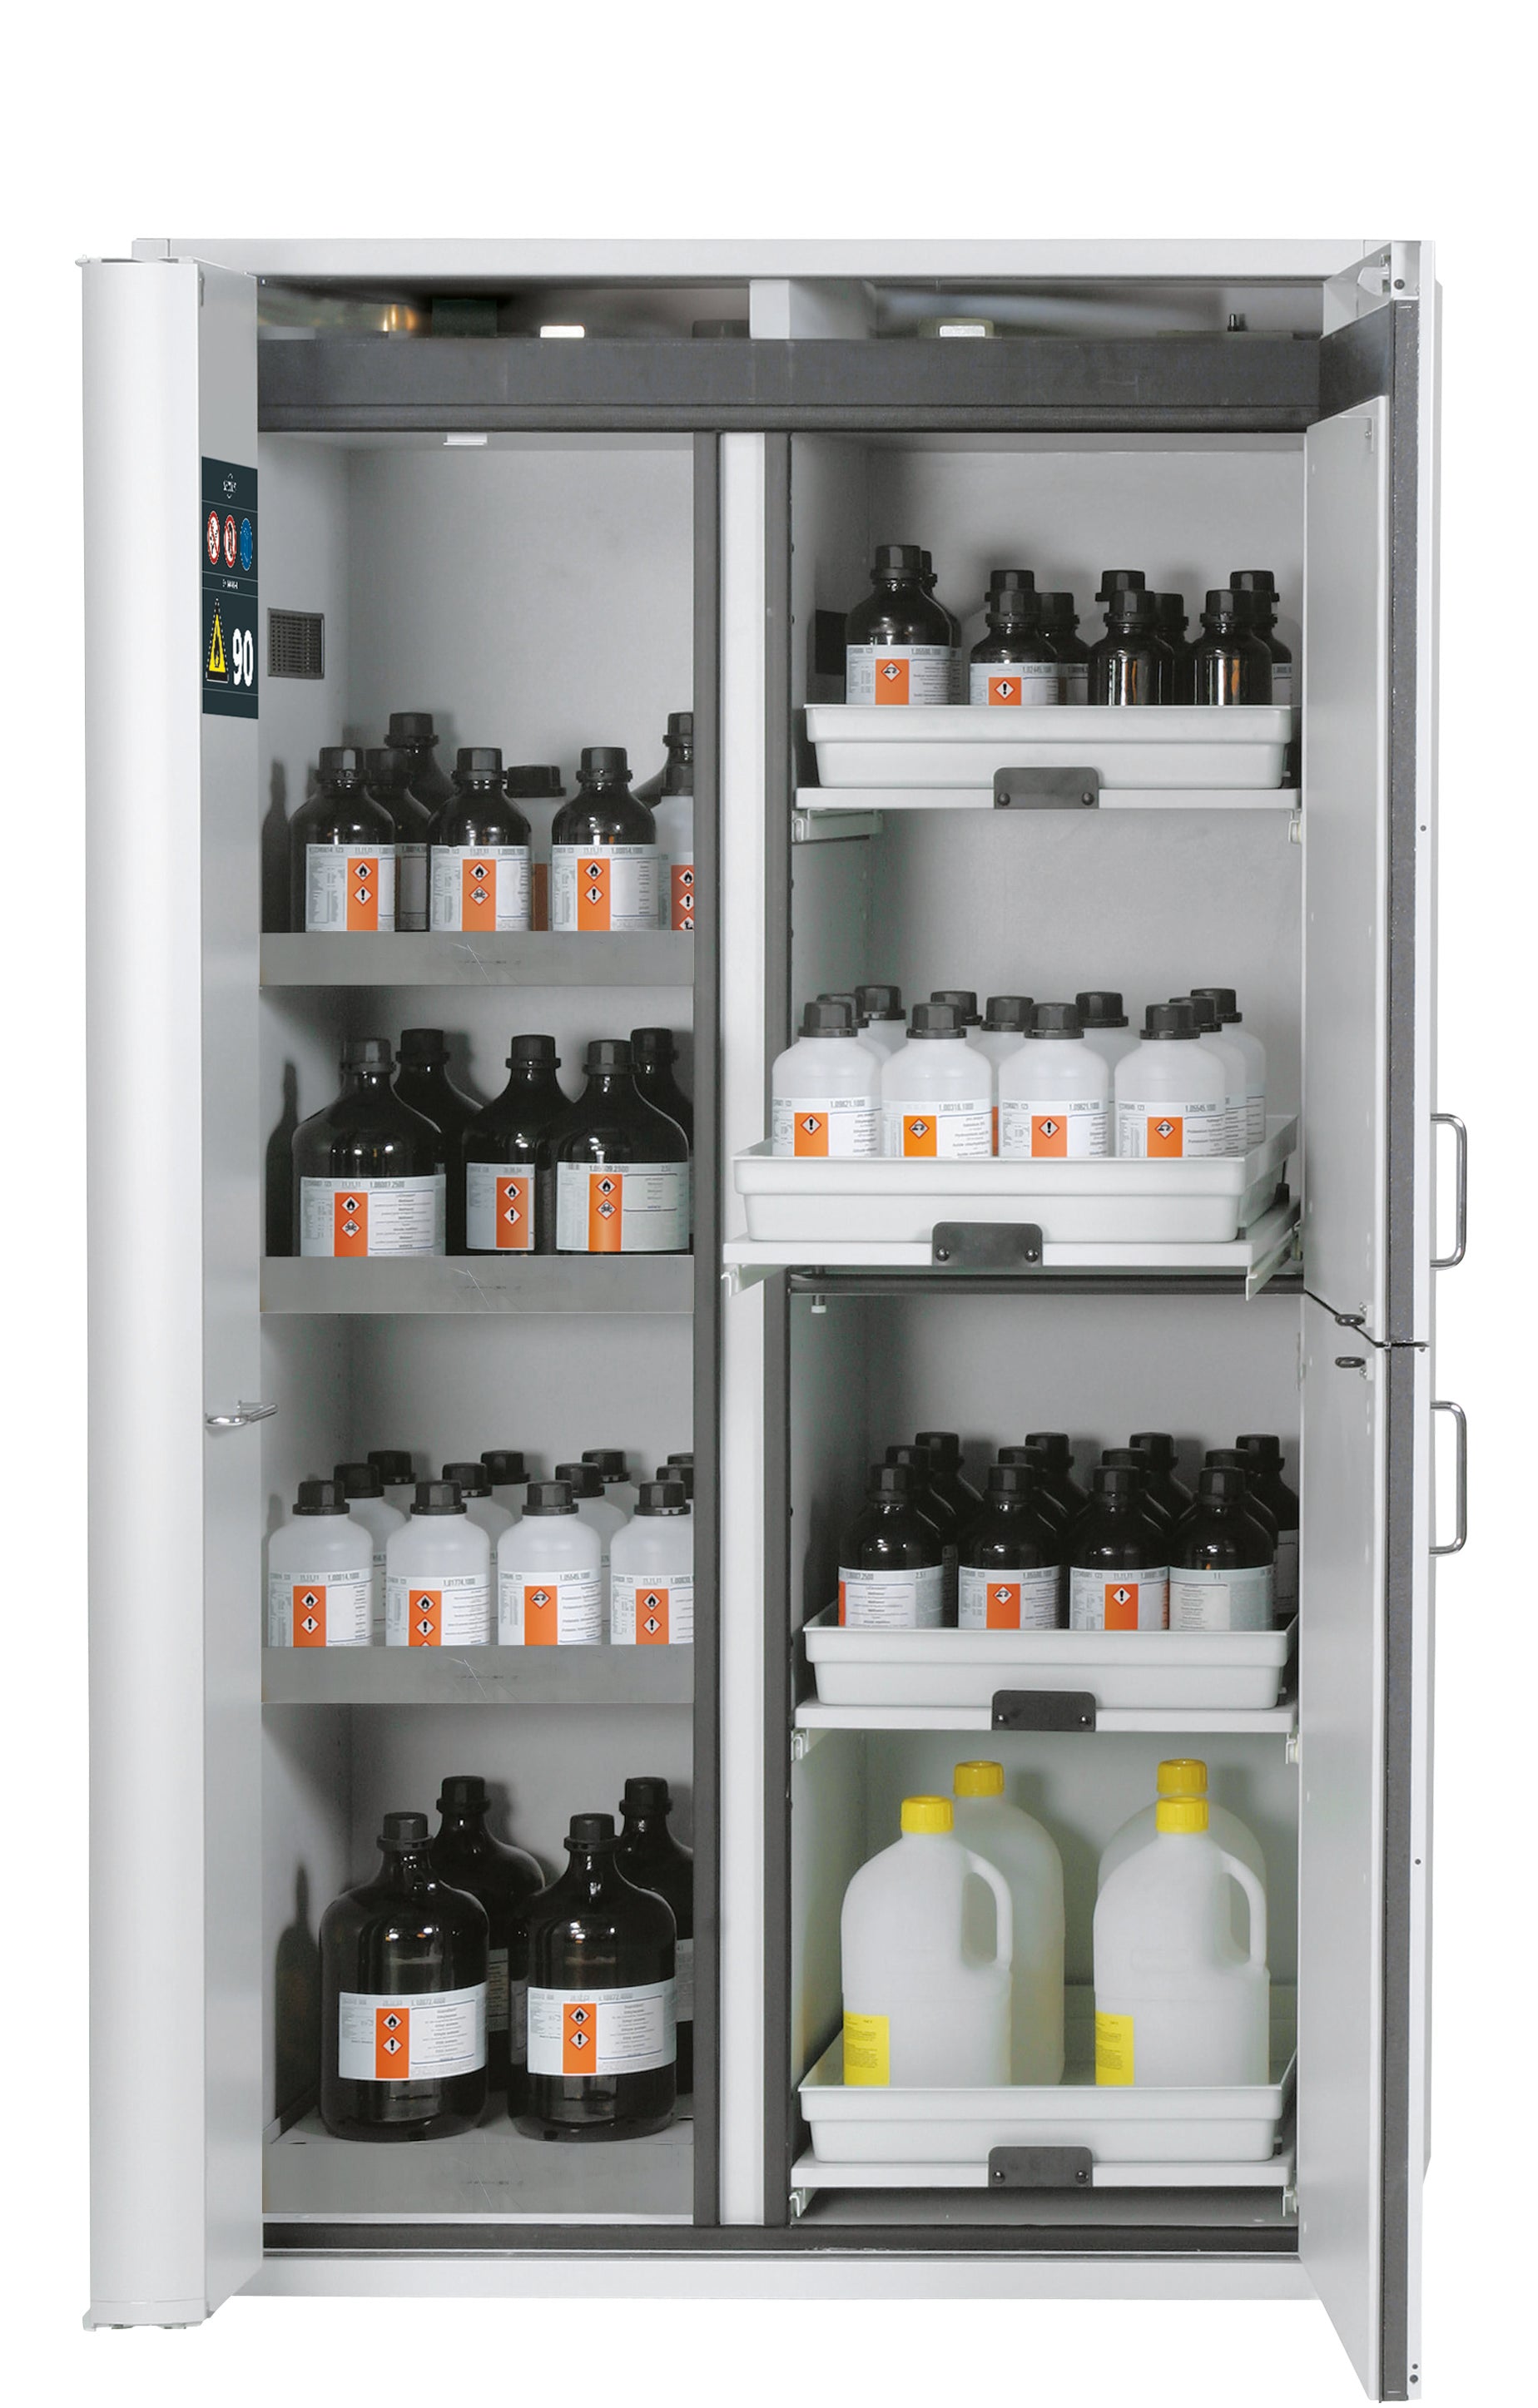 Type 90 combination safety cabinet K-PHOENIX Vol.2-90 model K90.196.120.MF.FWAC in light gray RAL 7035 with 3x standard shelves (stainless steel 1.4301)